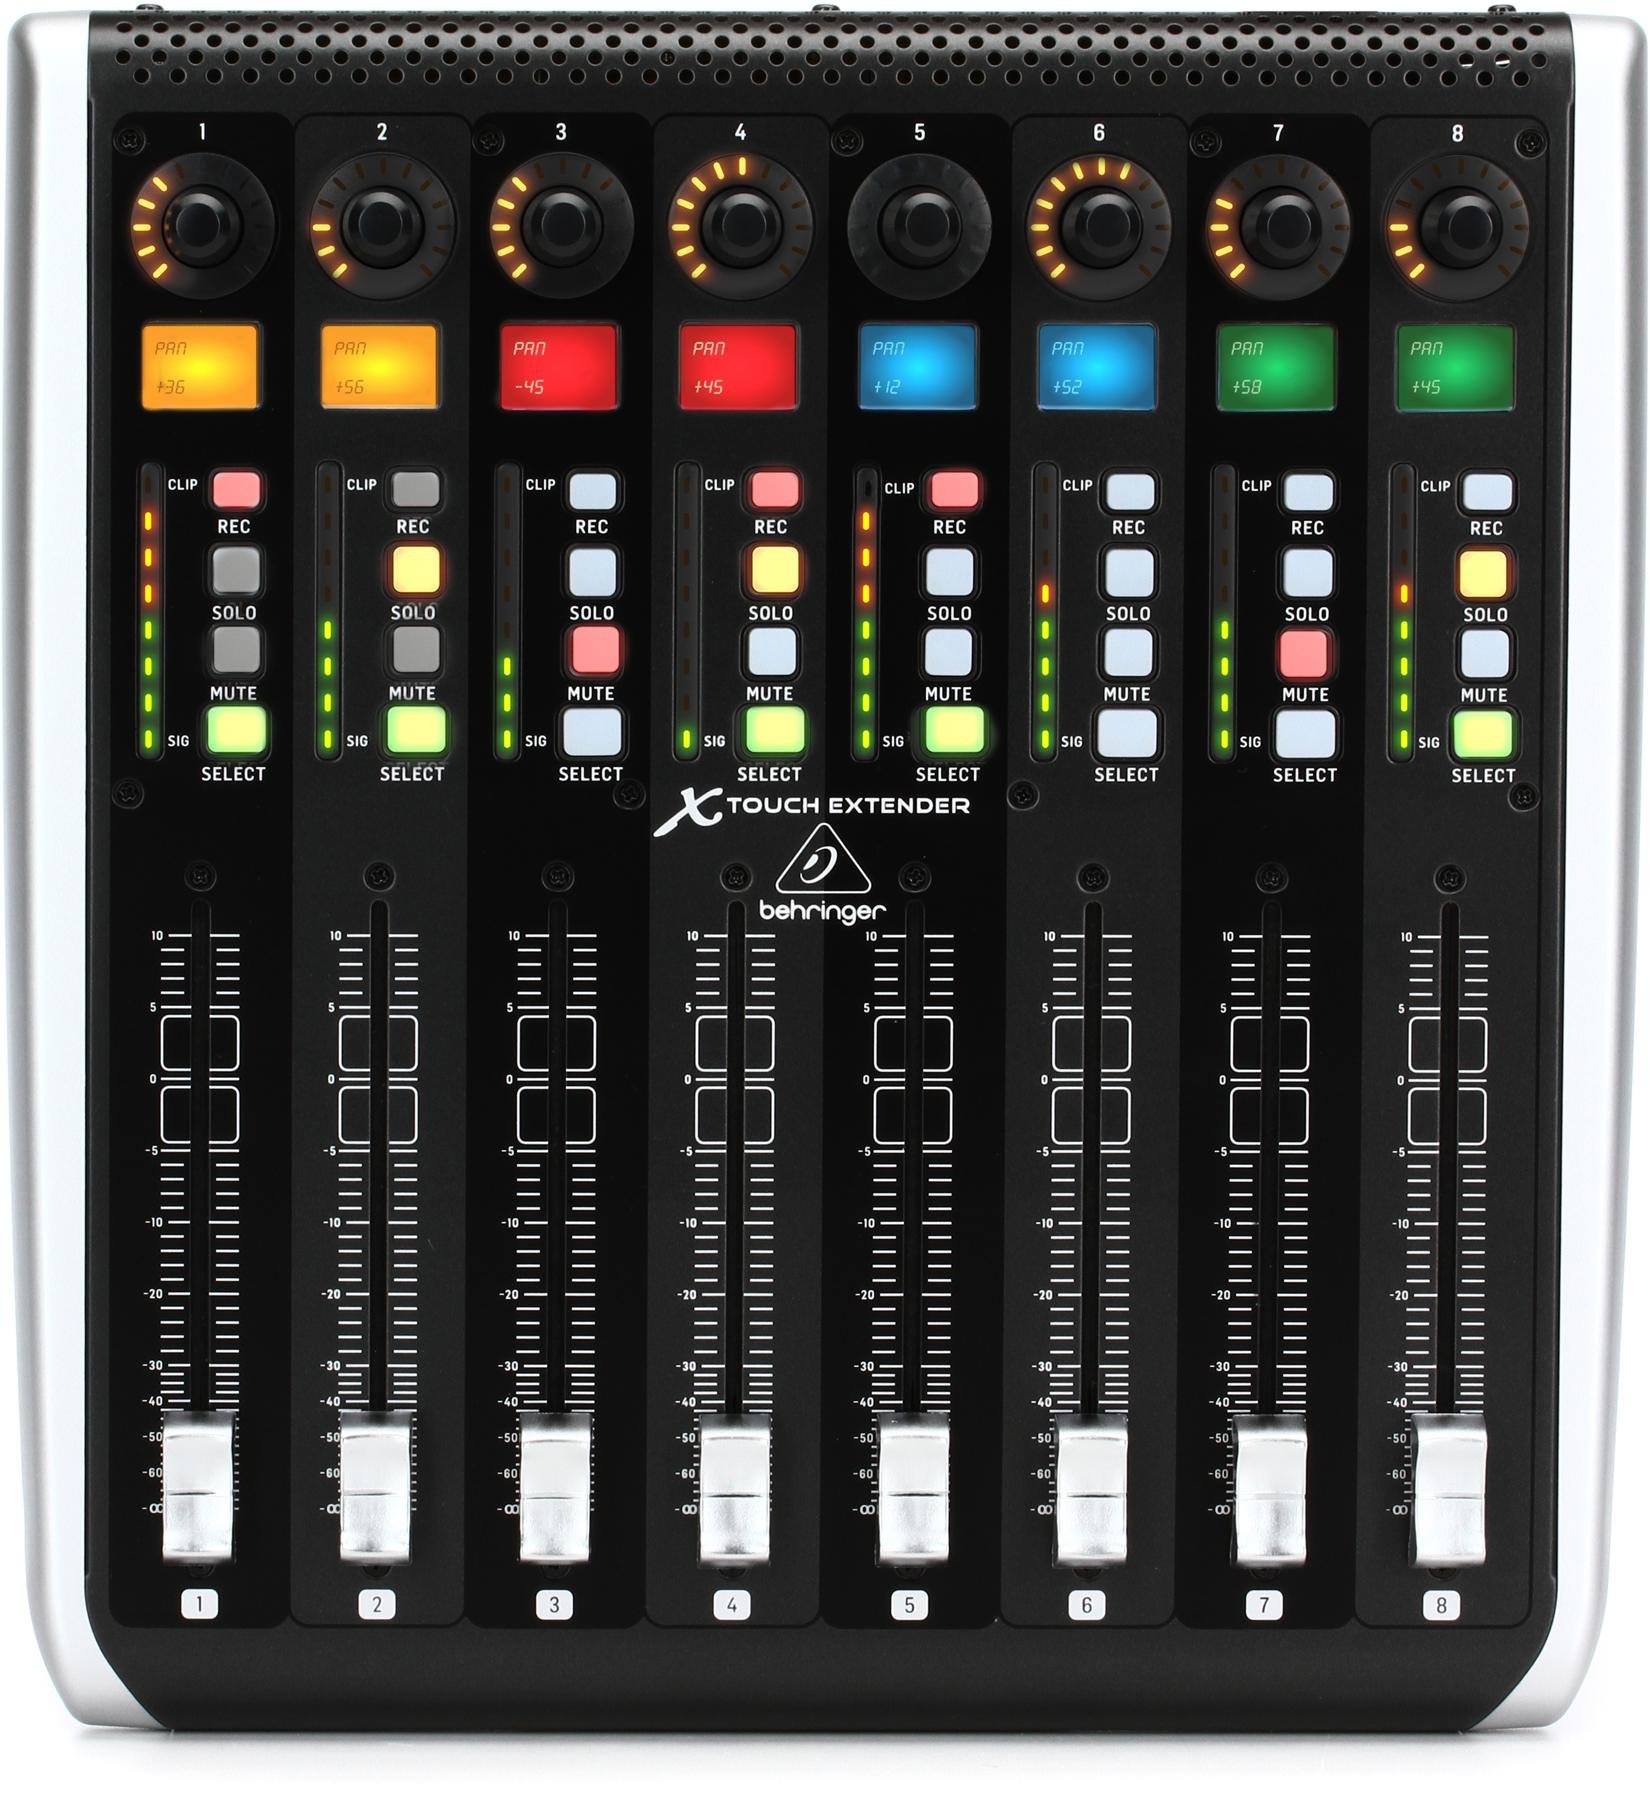 behringer x touch one logic pro x